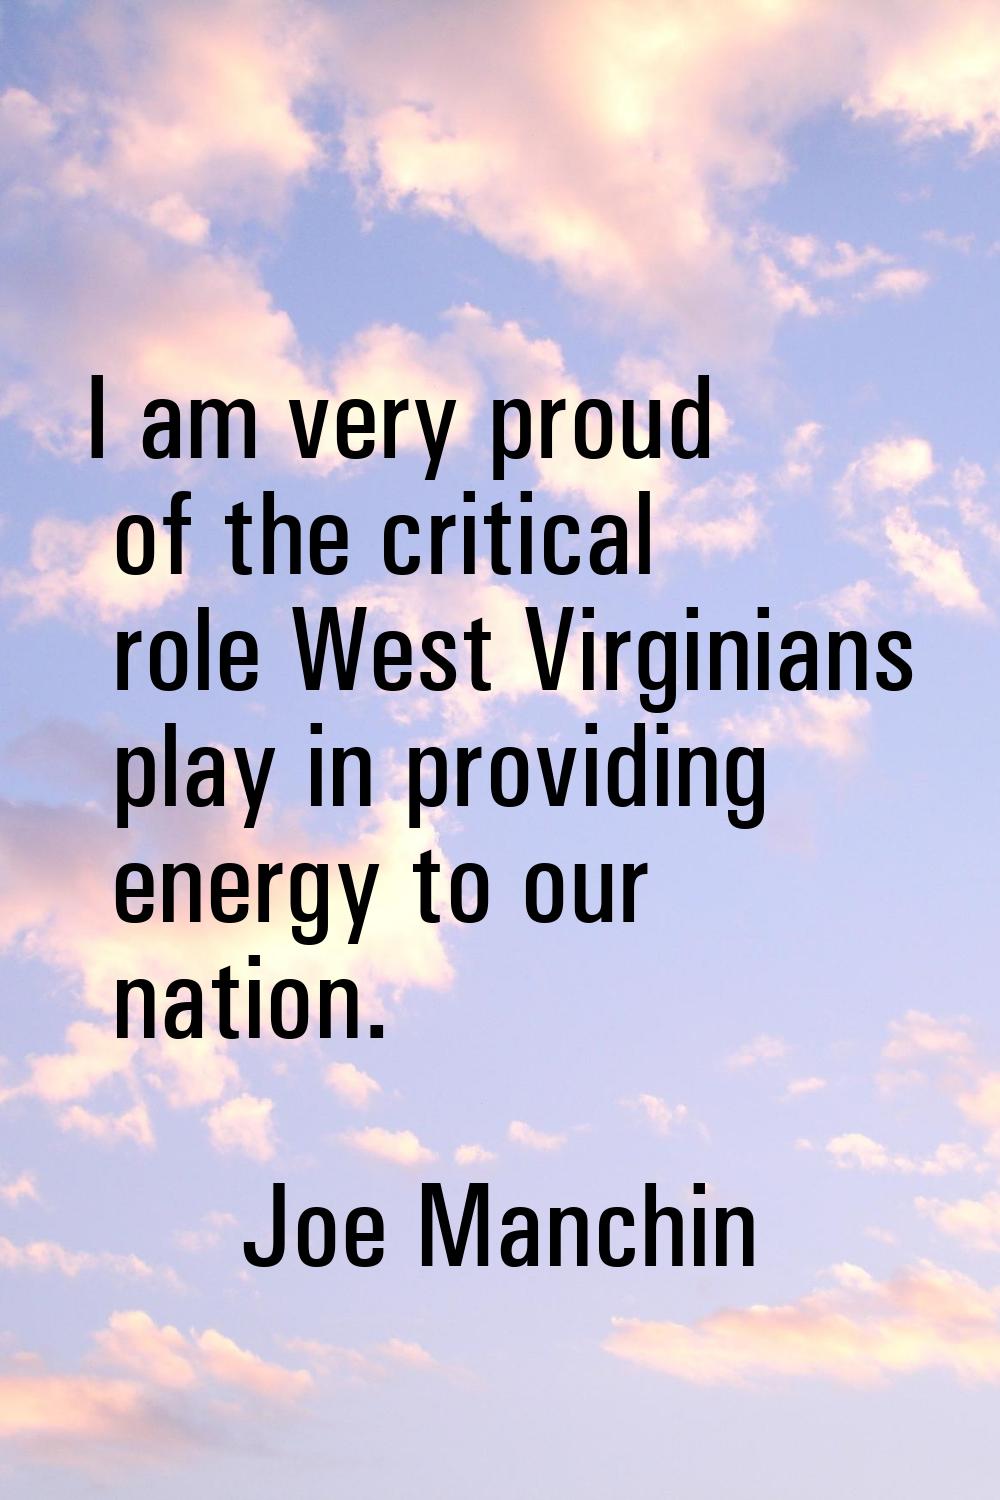 I am very proud of the critical role West Virginians play in providing energy to our nation.